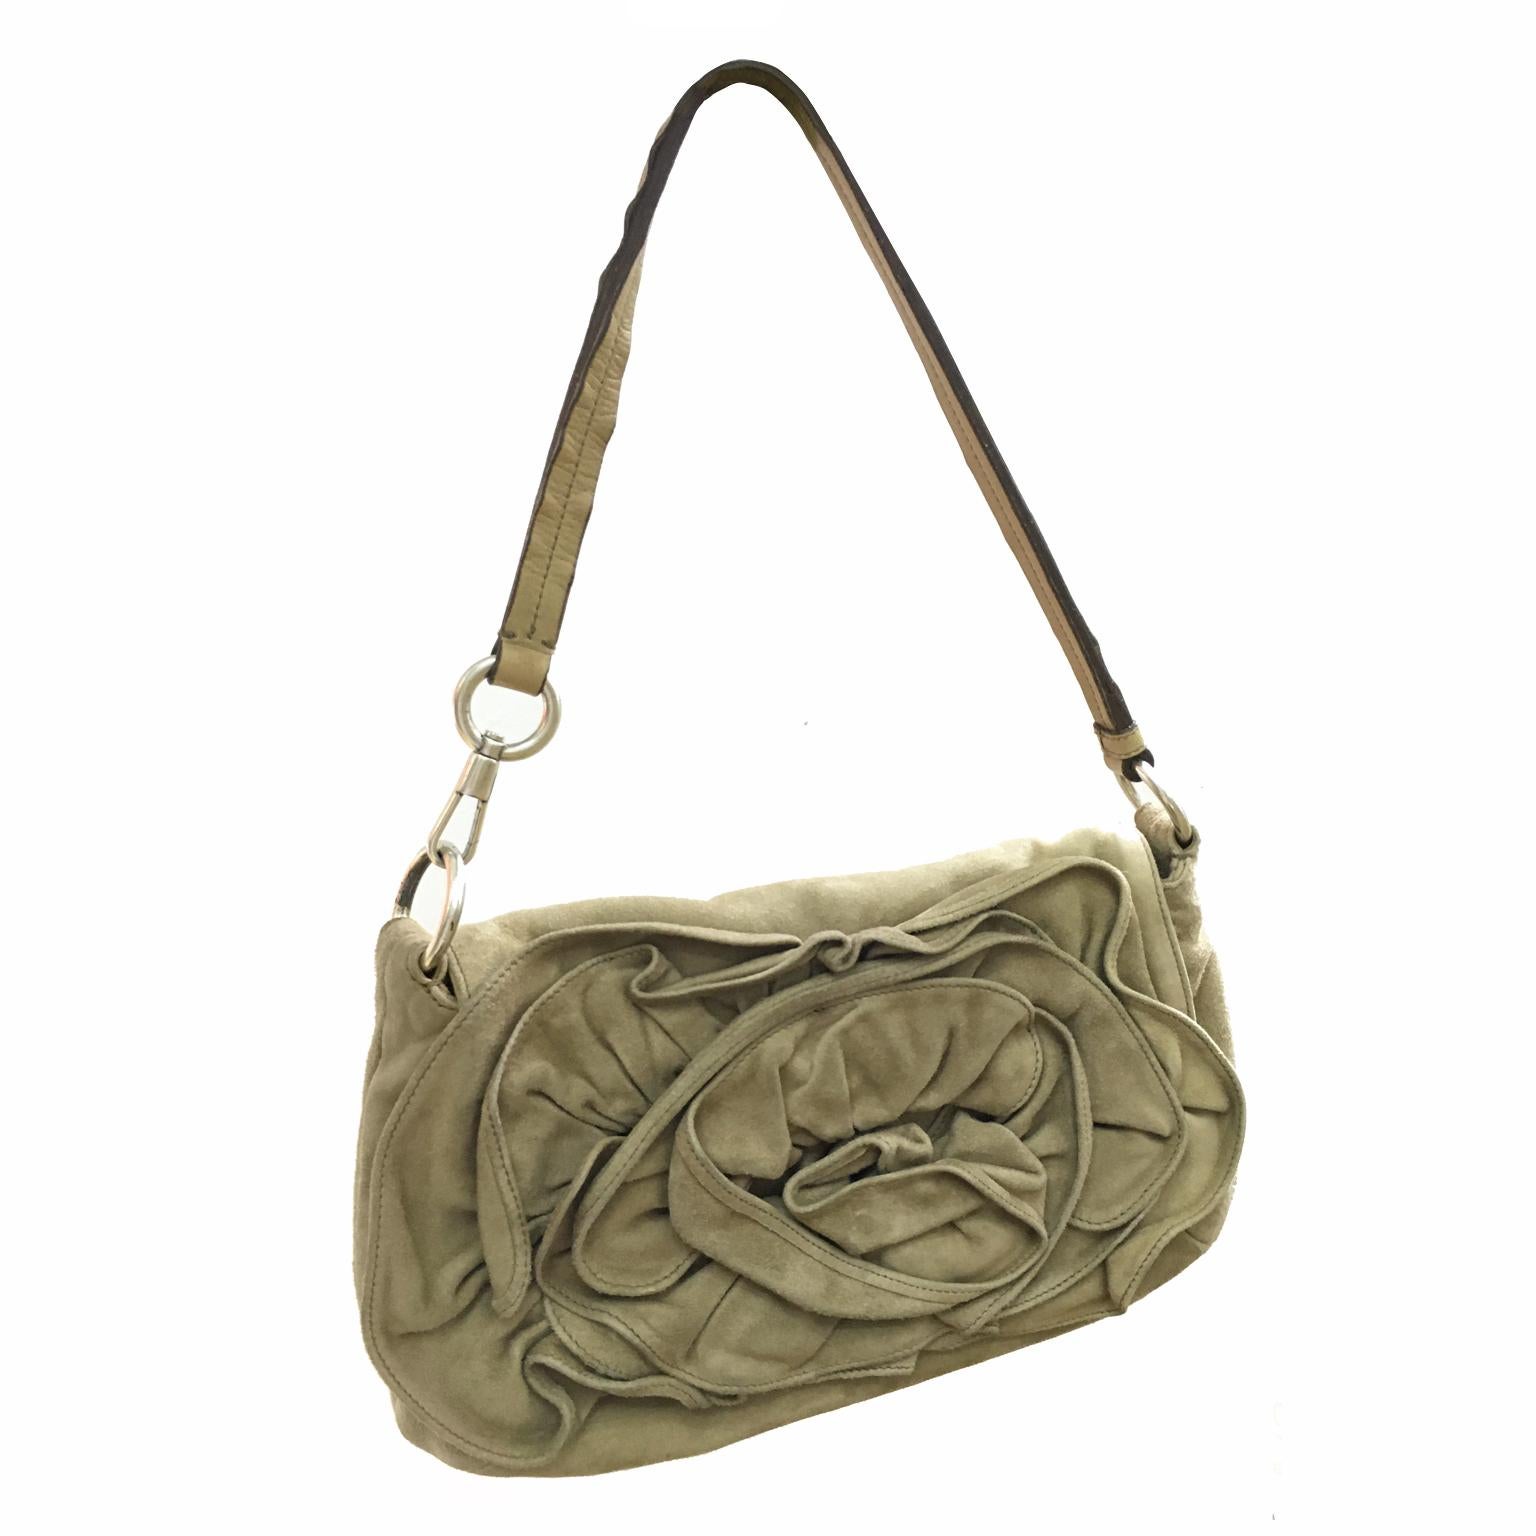 Yves Saint Laurent by Tom Ford, Nadja large rose suede shoulder bag.
Magnetic snap front closure, Silver tone hardware.
Interior features: One wall pocket with zipper closure 

Made In ITALY

Measurements :
Length 12